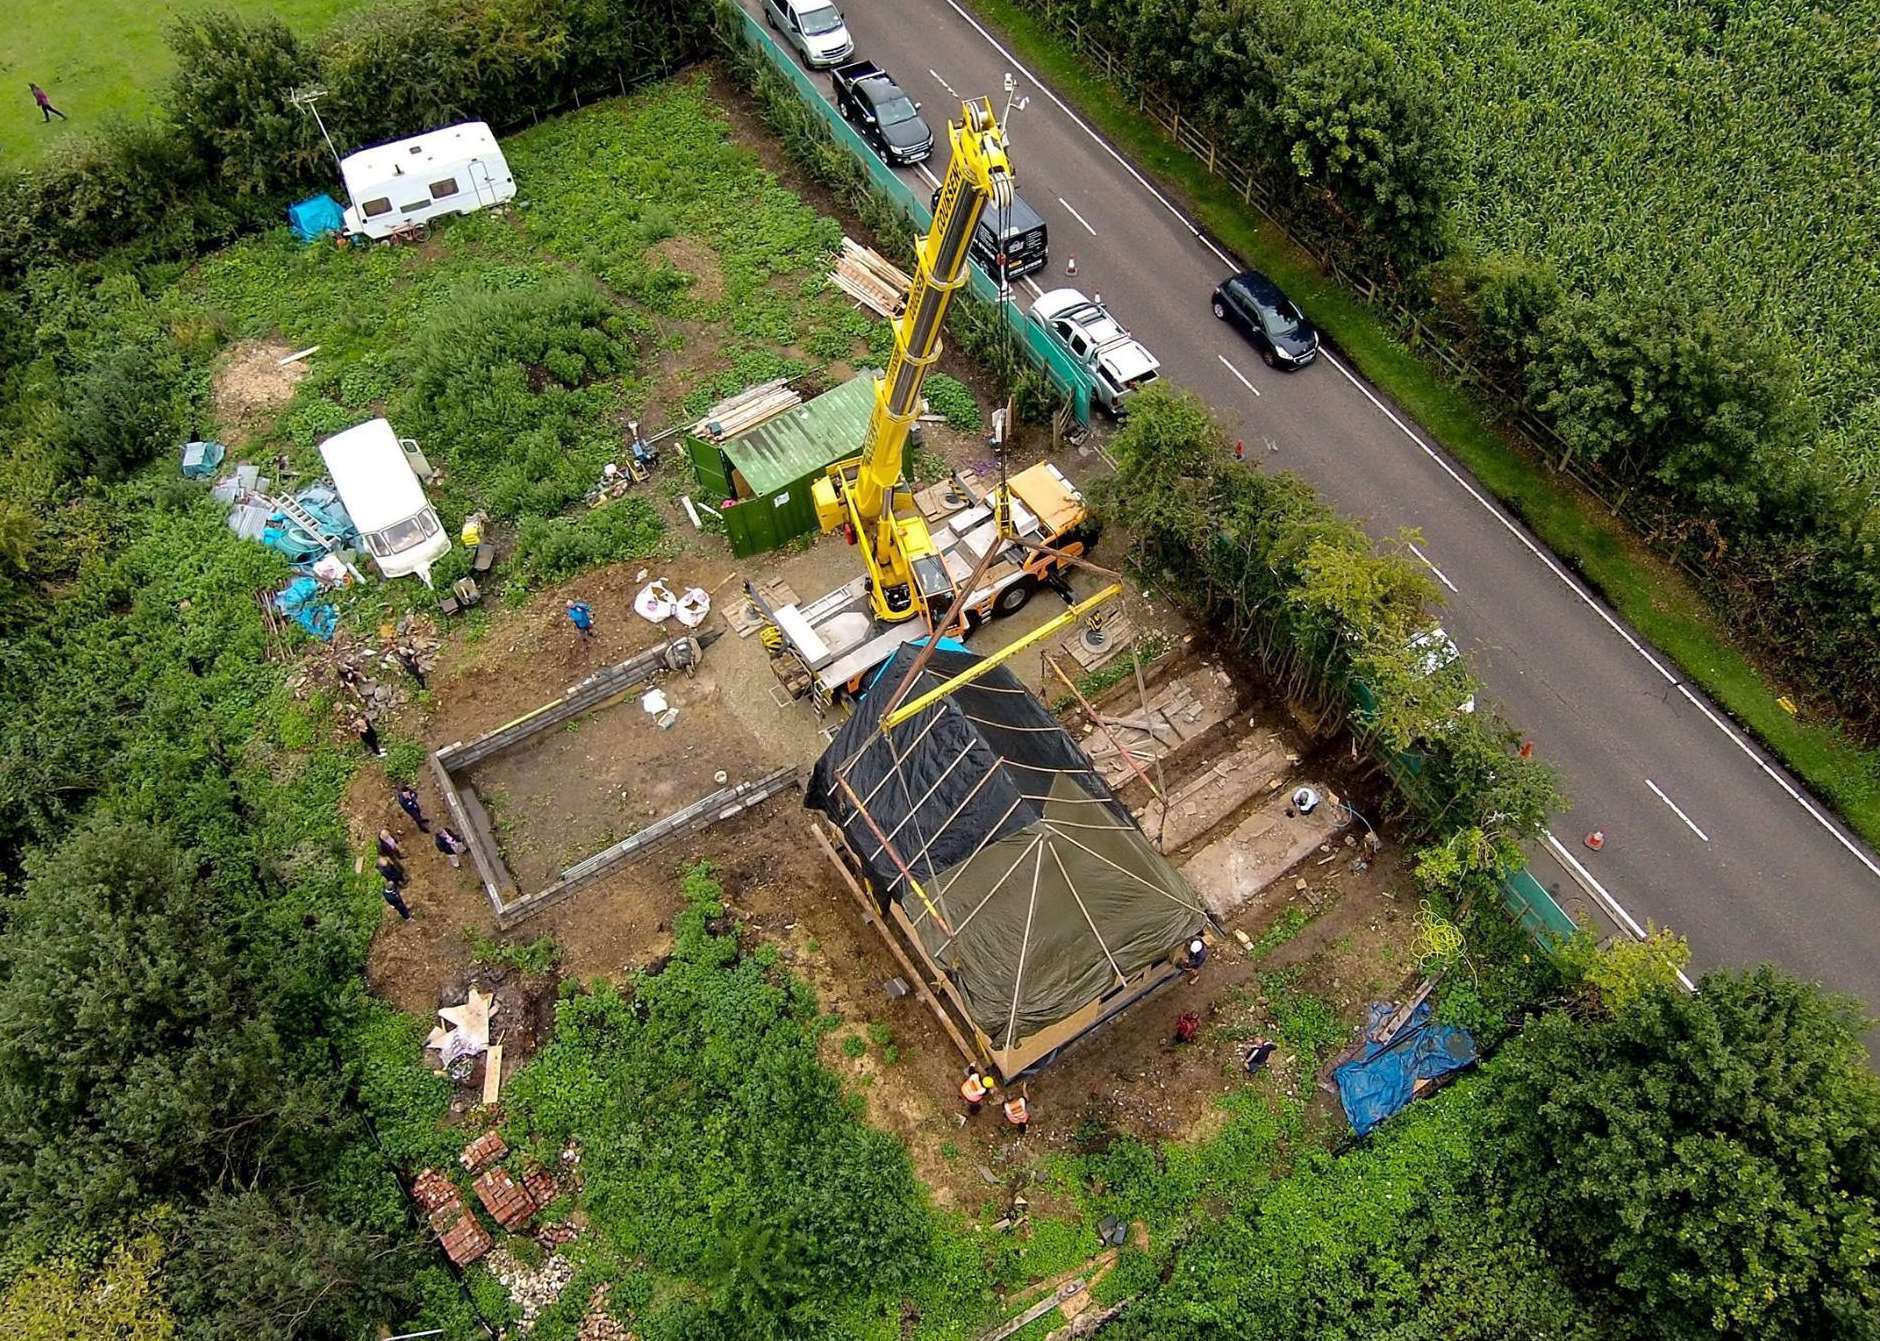 The operation to move the Black House is captured on camera from the air